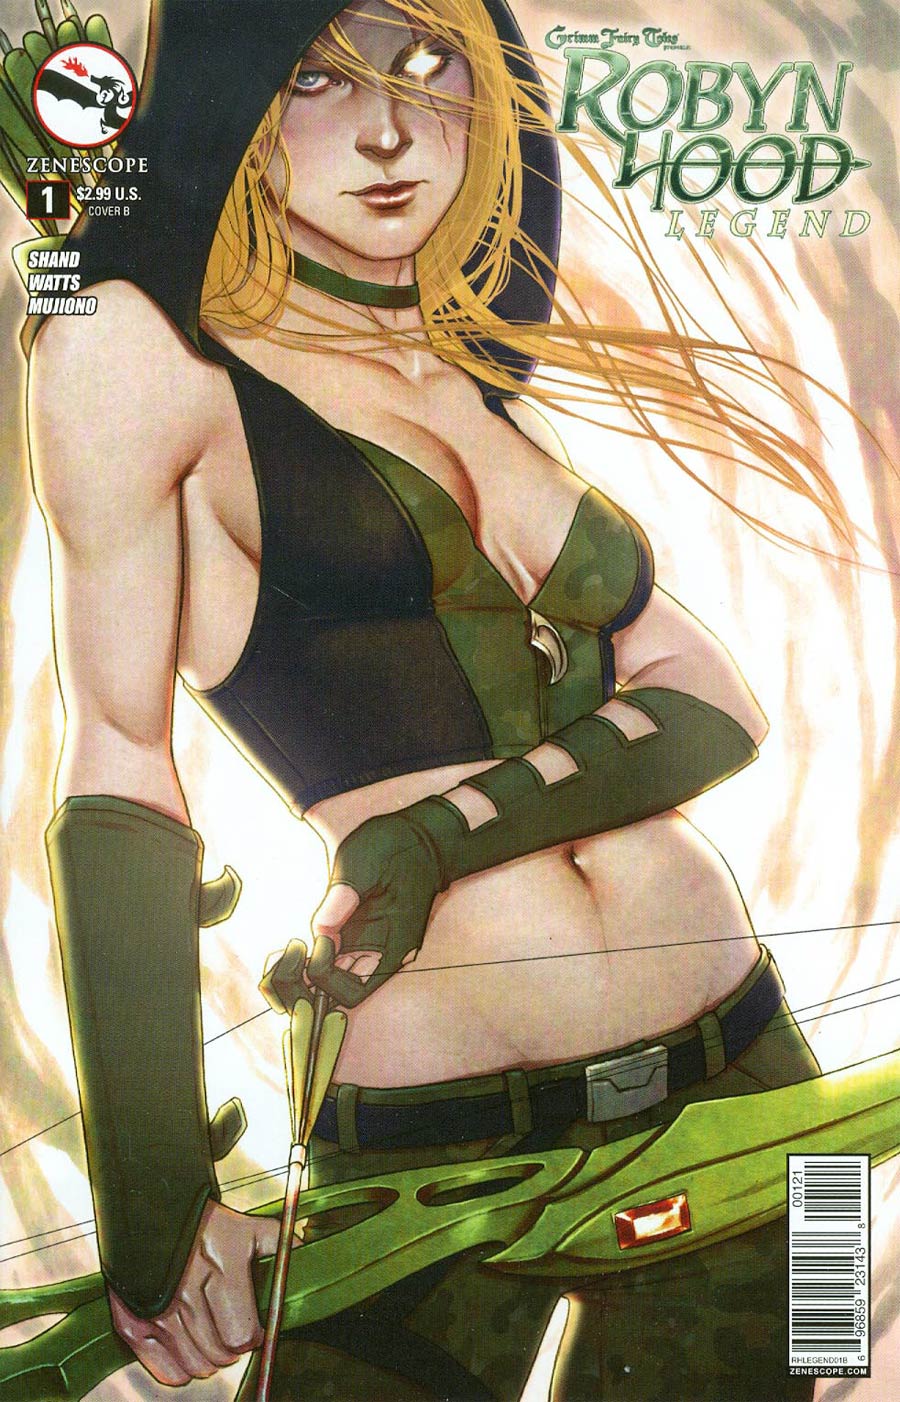 Grimm Fairy Tales Presents Robyn Hood Legend #1 Cover B Jenny Frison